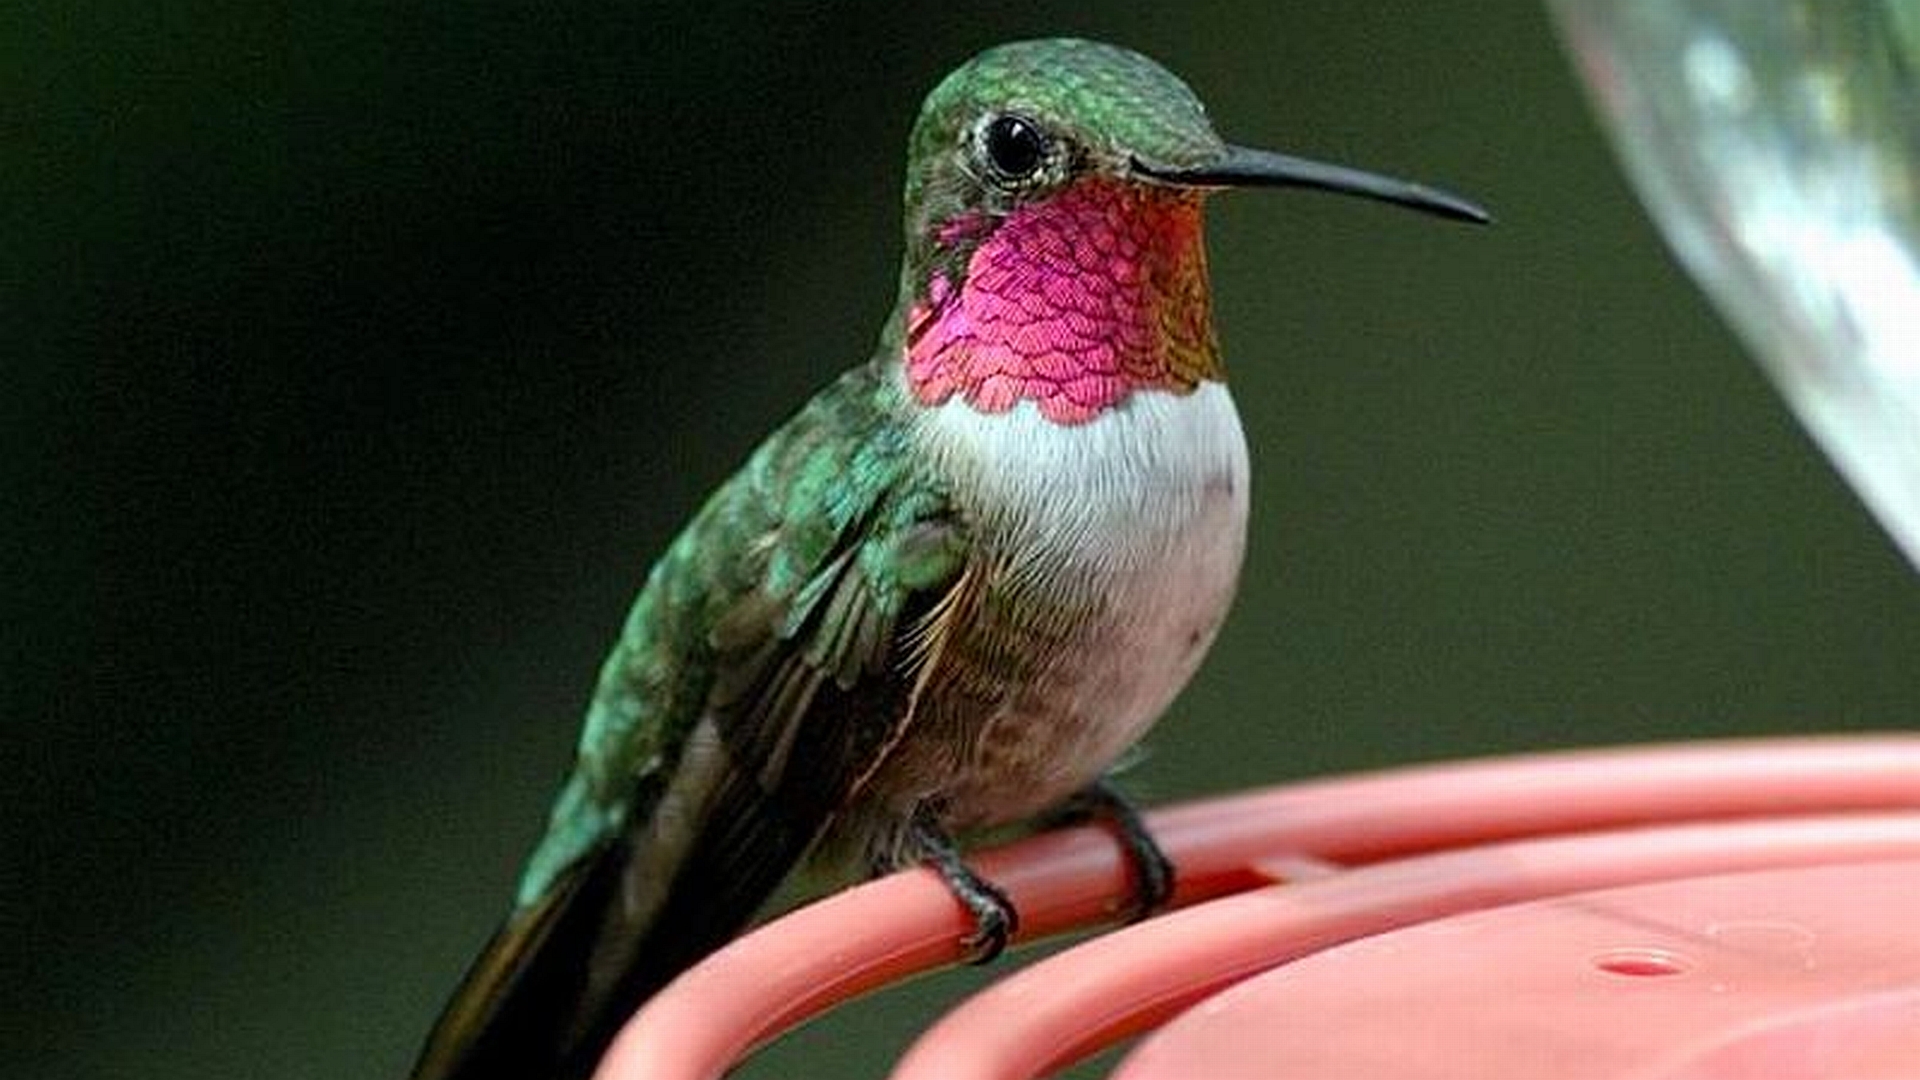 Colorful hummingbird perched on a branch, surrounded by vibrant foliage.